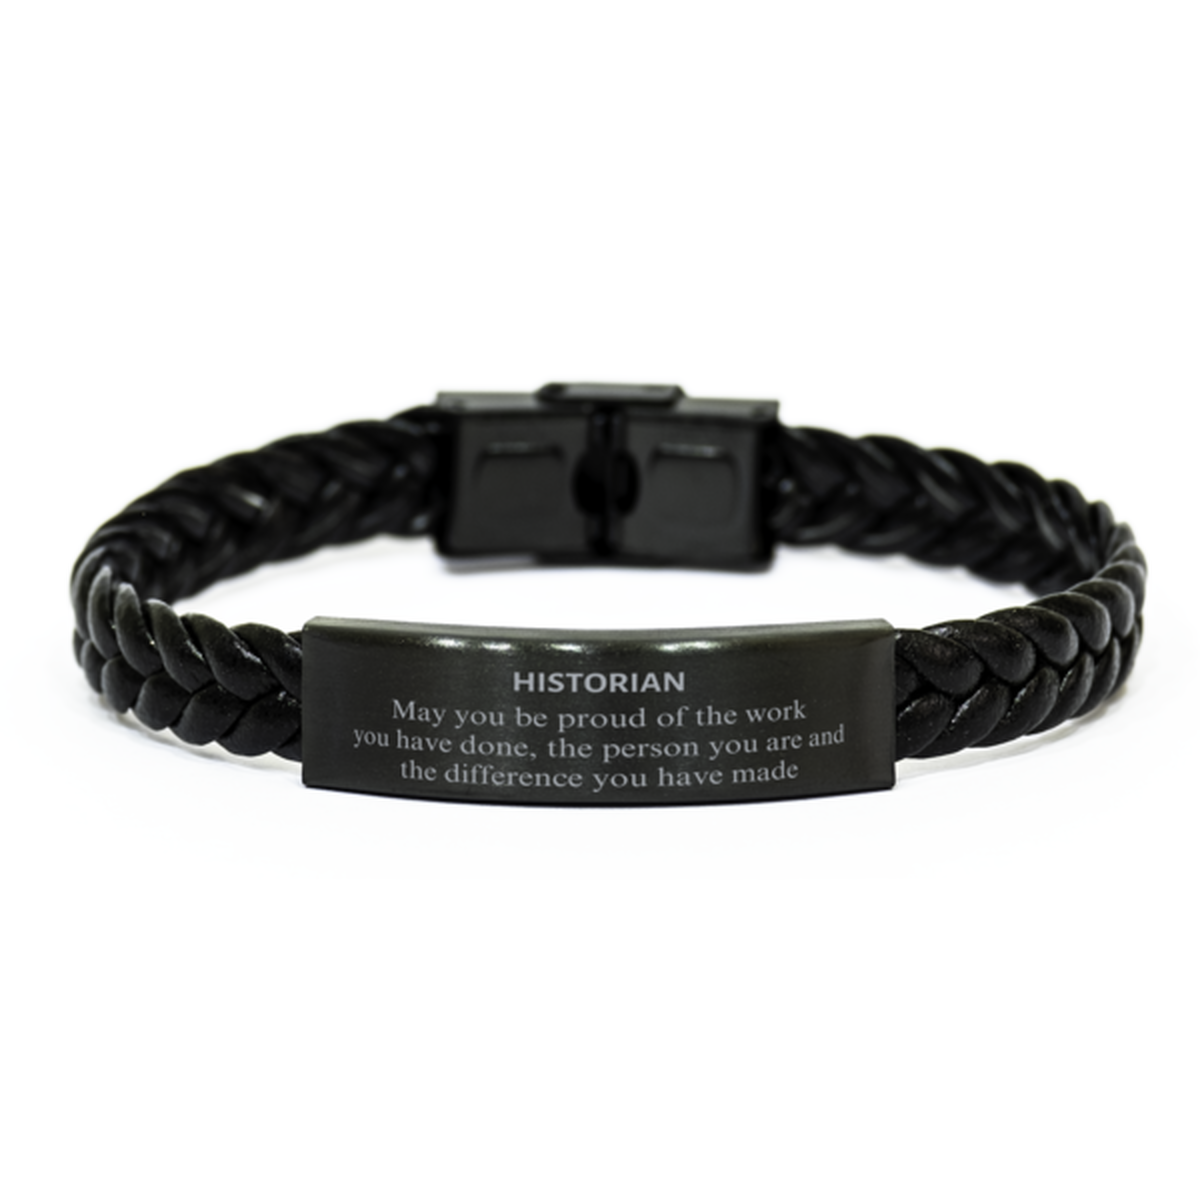 Historian May you be proud of the work you have done, Retirement Historian Braided Leather Bracelet for Colleague Appreciation Gifts Amazing for Historian